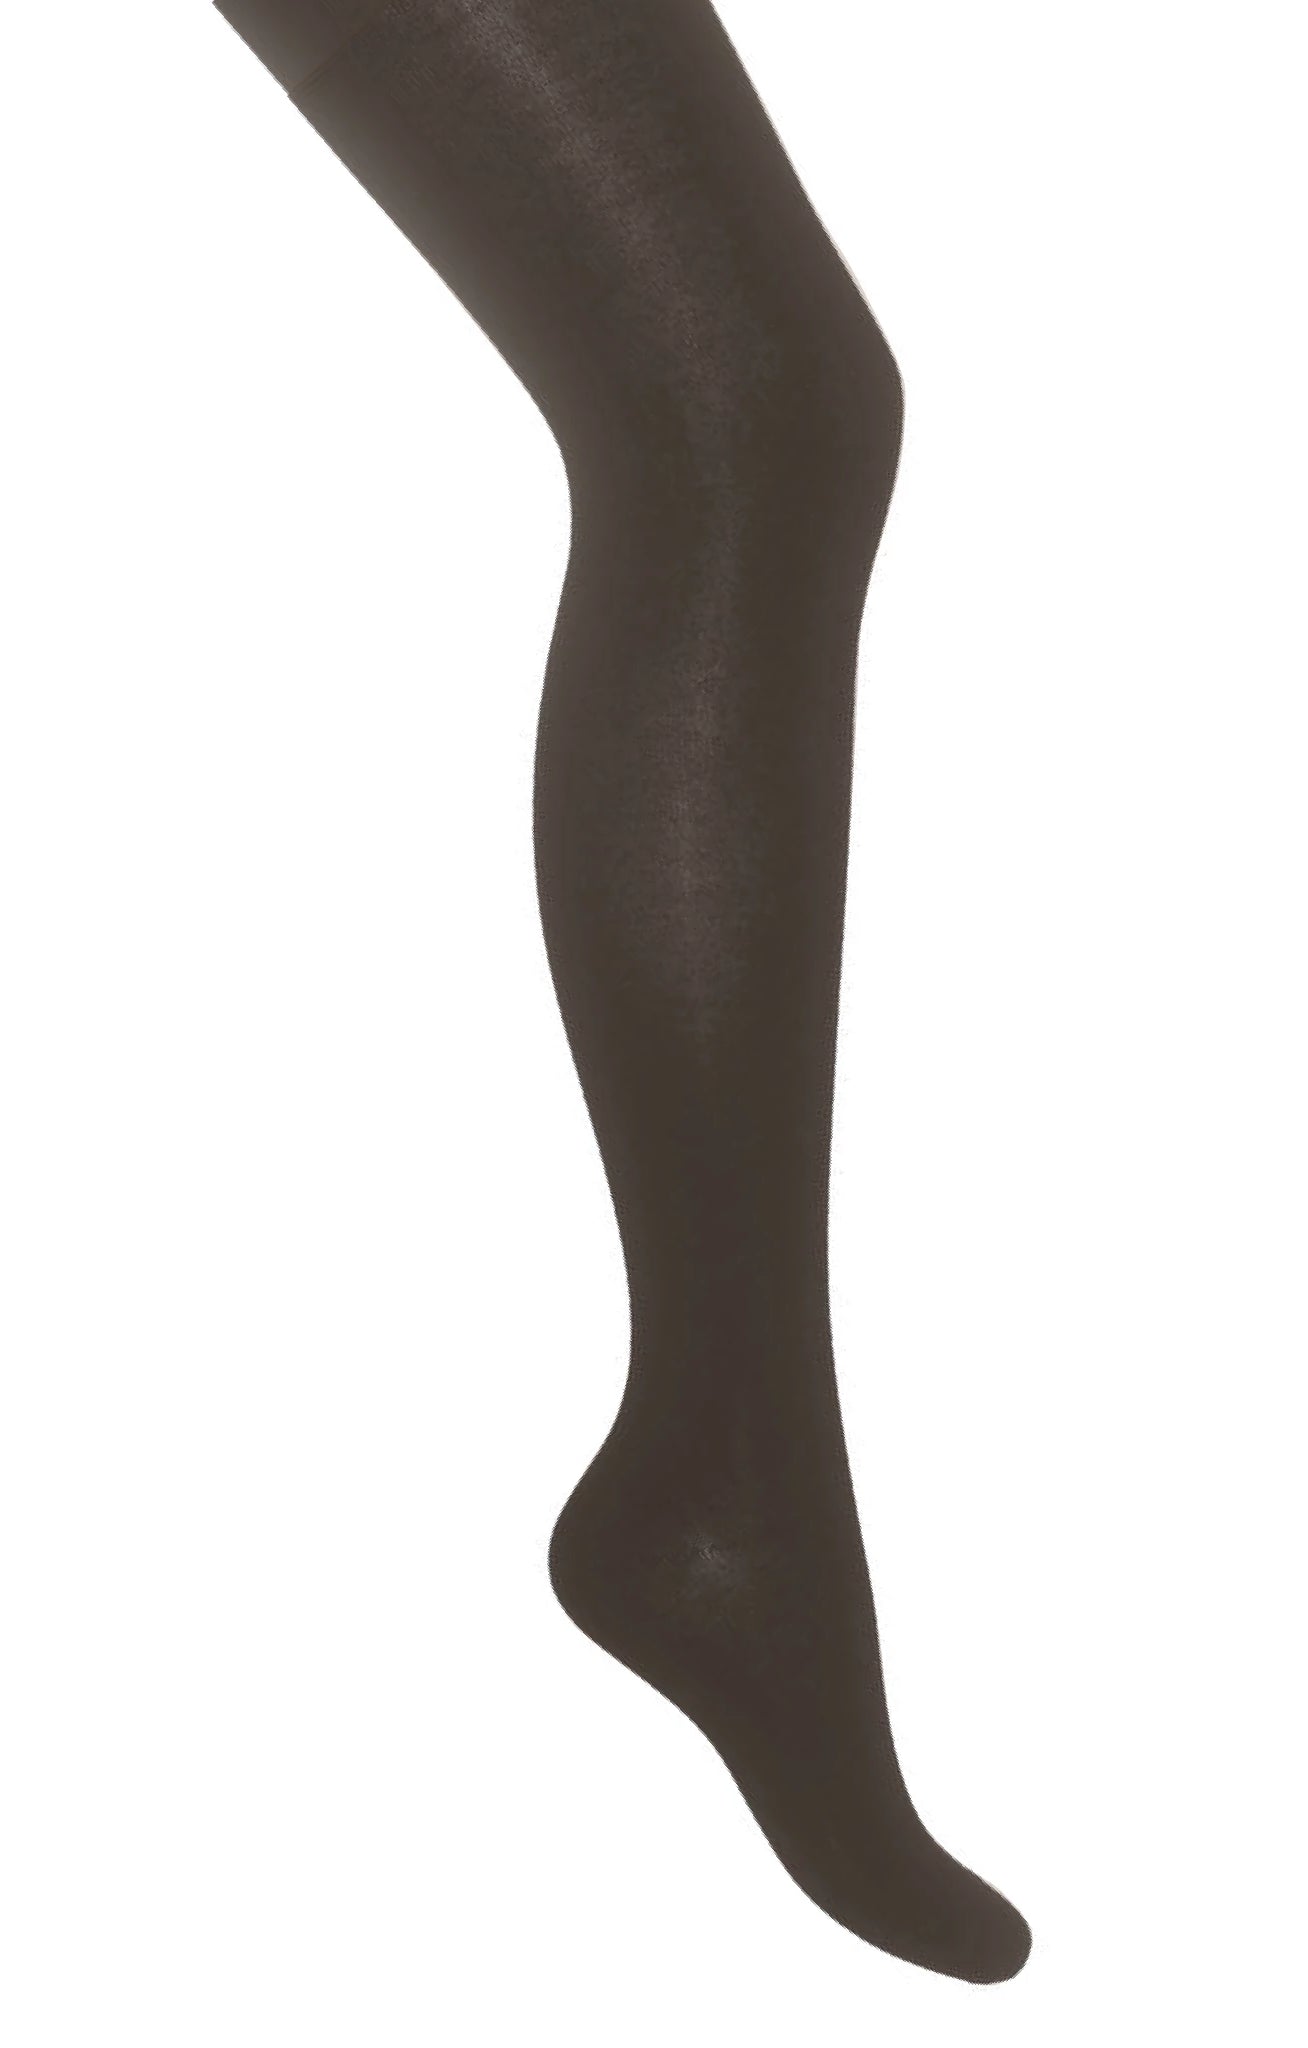 Bonnie Doon Cotton Tights - brown knitted Winter thermal warm tights